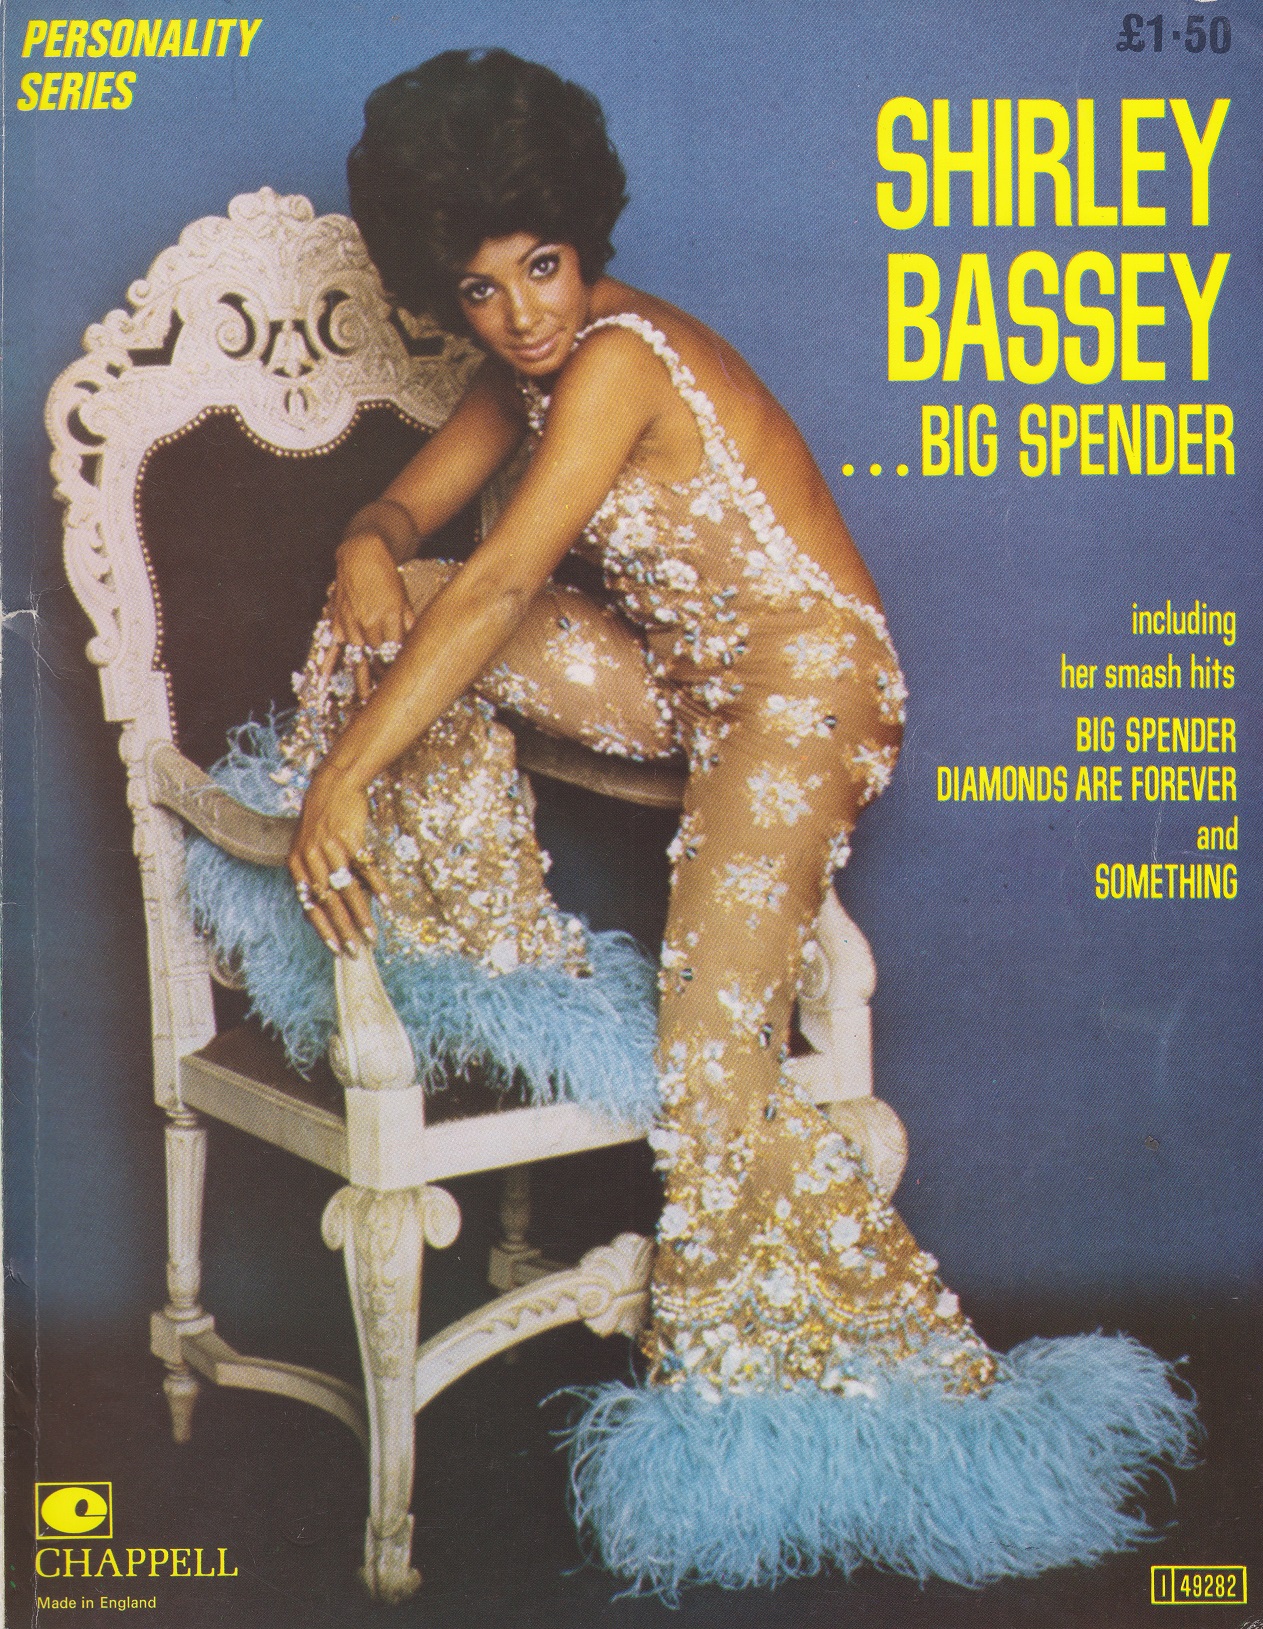 Shirley bassey nude, fappening, sexy photos, uncensored